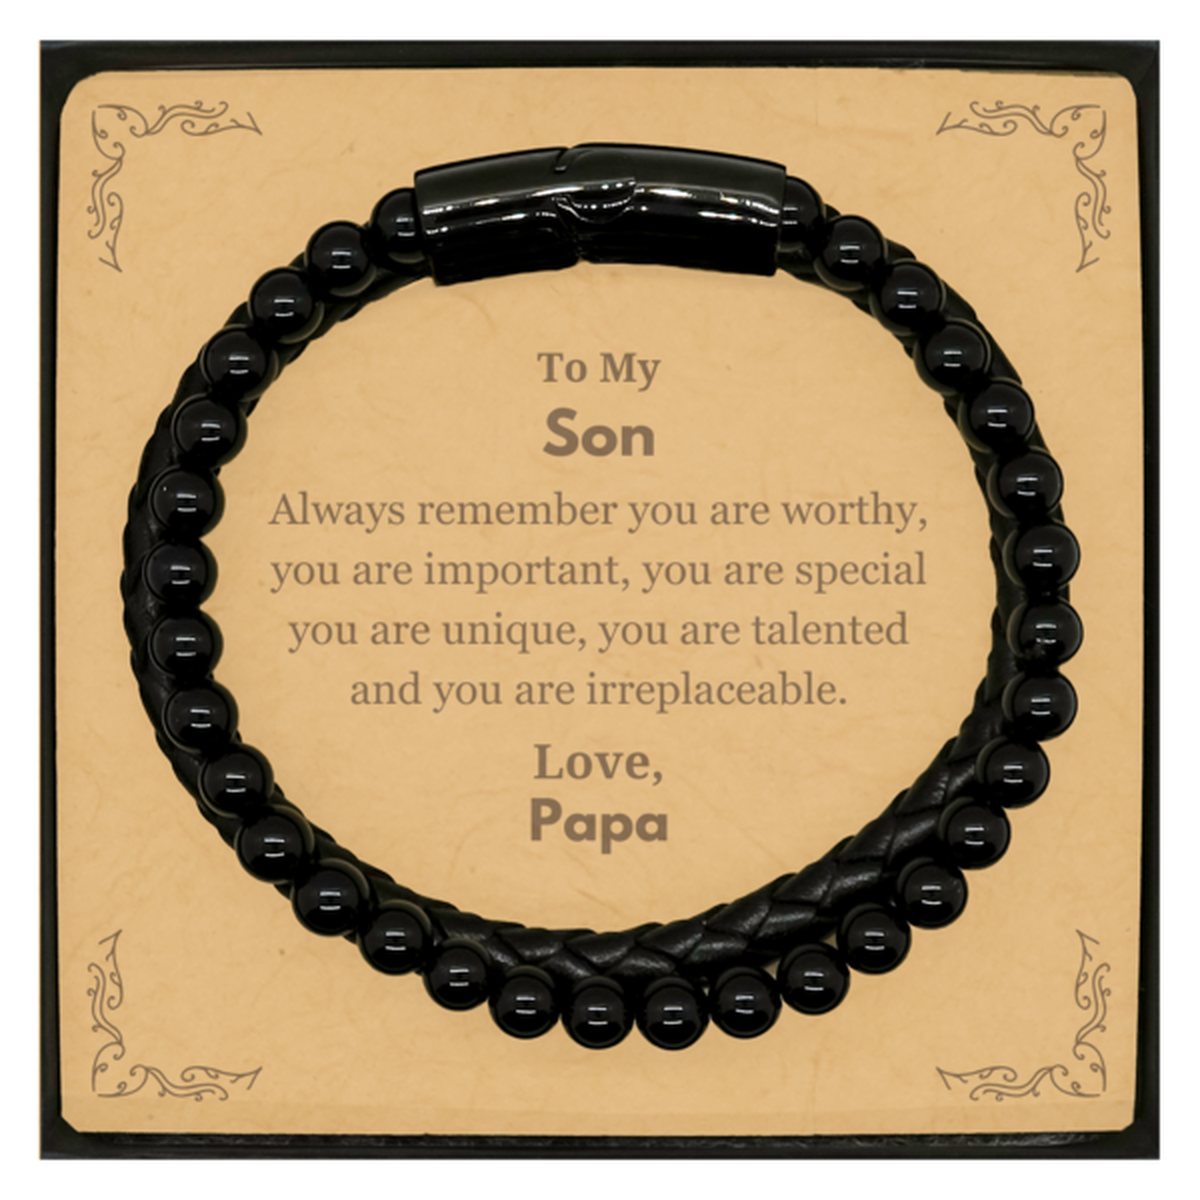 Son Birthday Gifts from Papa, Inspirational Stone Leather Bracelets for Son Christmas Graduation Gifts for Son Always remember you are worthy, you are important. Love, Papa